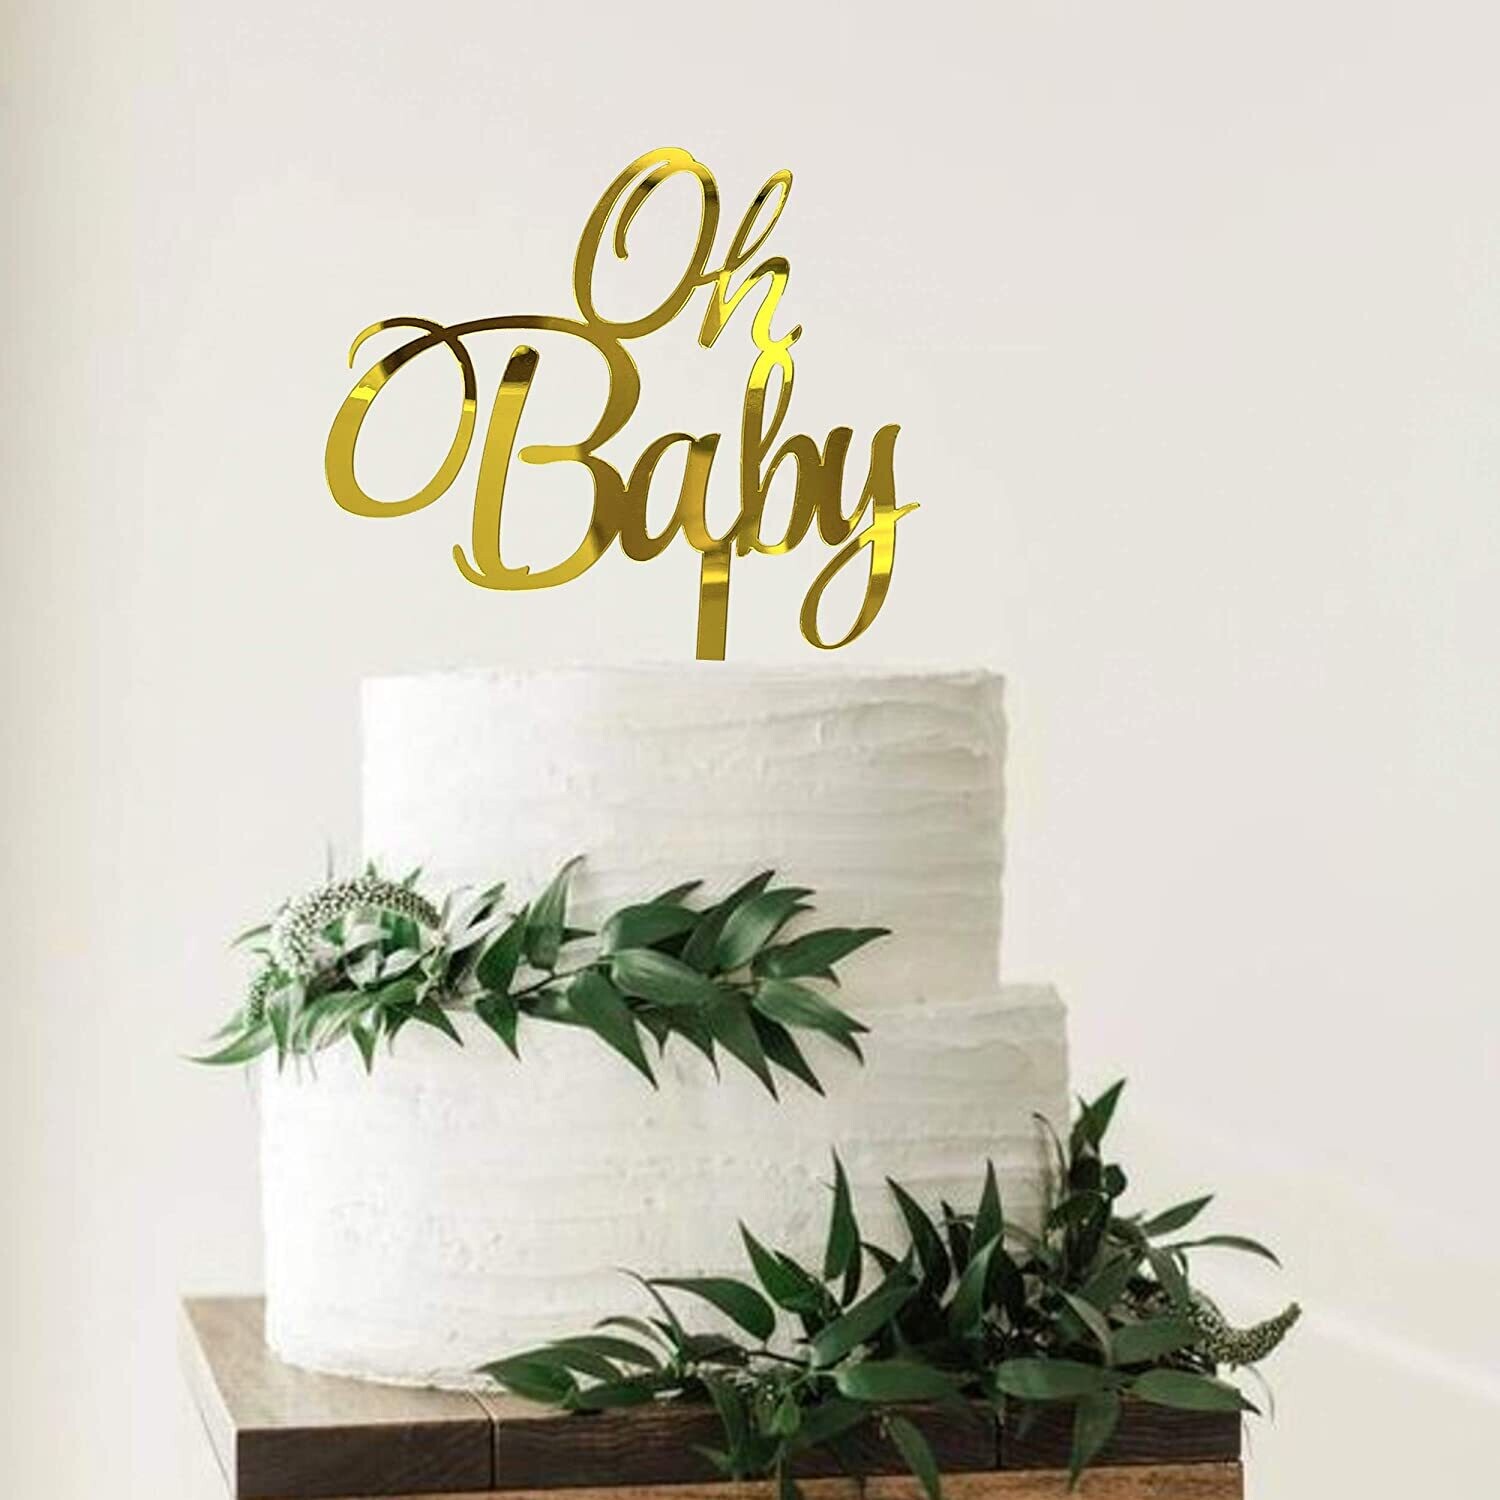 Baby Shower Cake Topper “OH BABY” Acrylic Mirror Gold Elegant Handwriting Sign - Smash Cake Topper, New Baby Gender Reveal Party Cake Decorations for Photo Booth Props